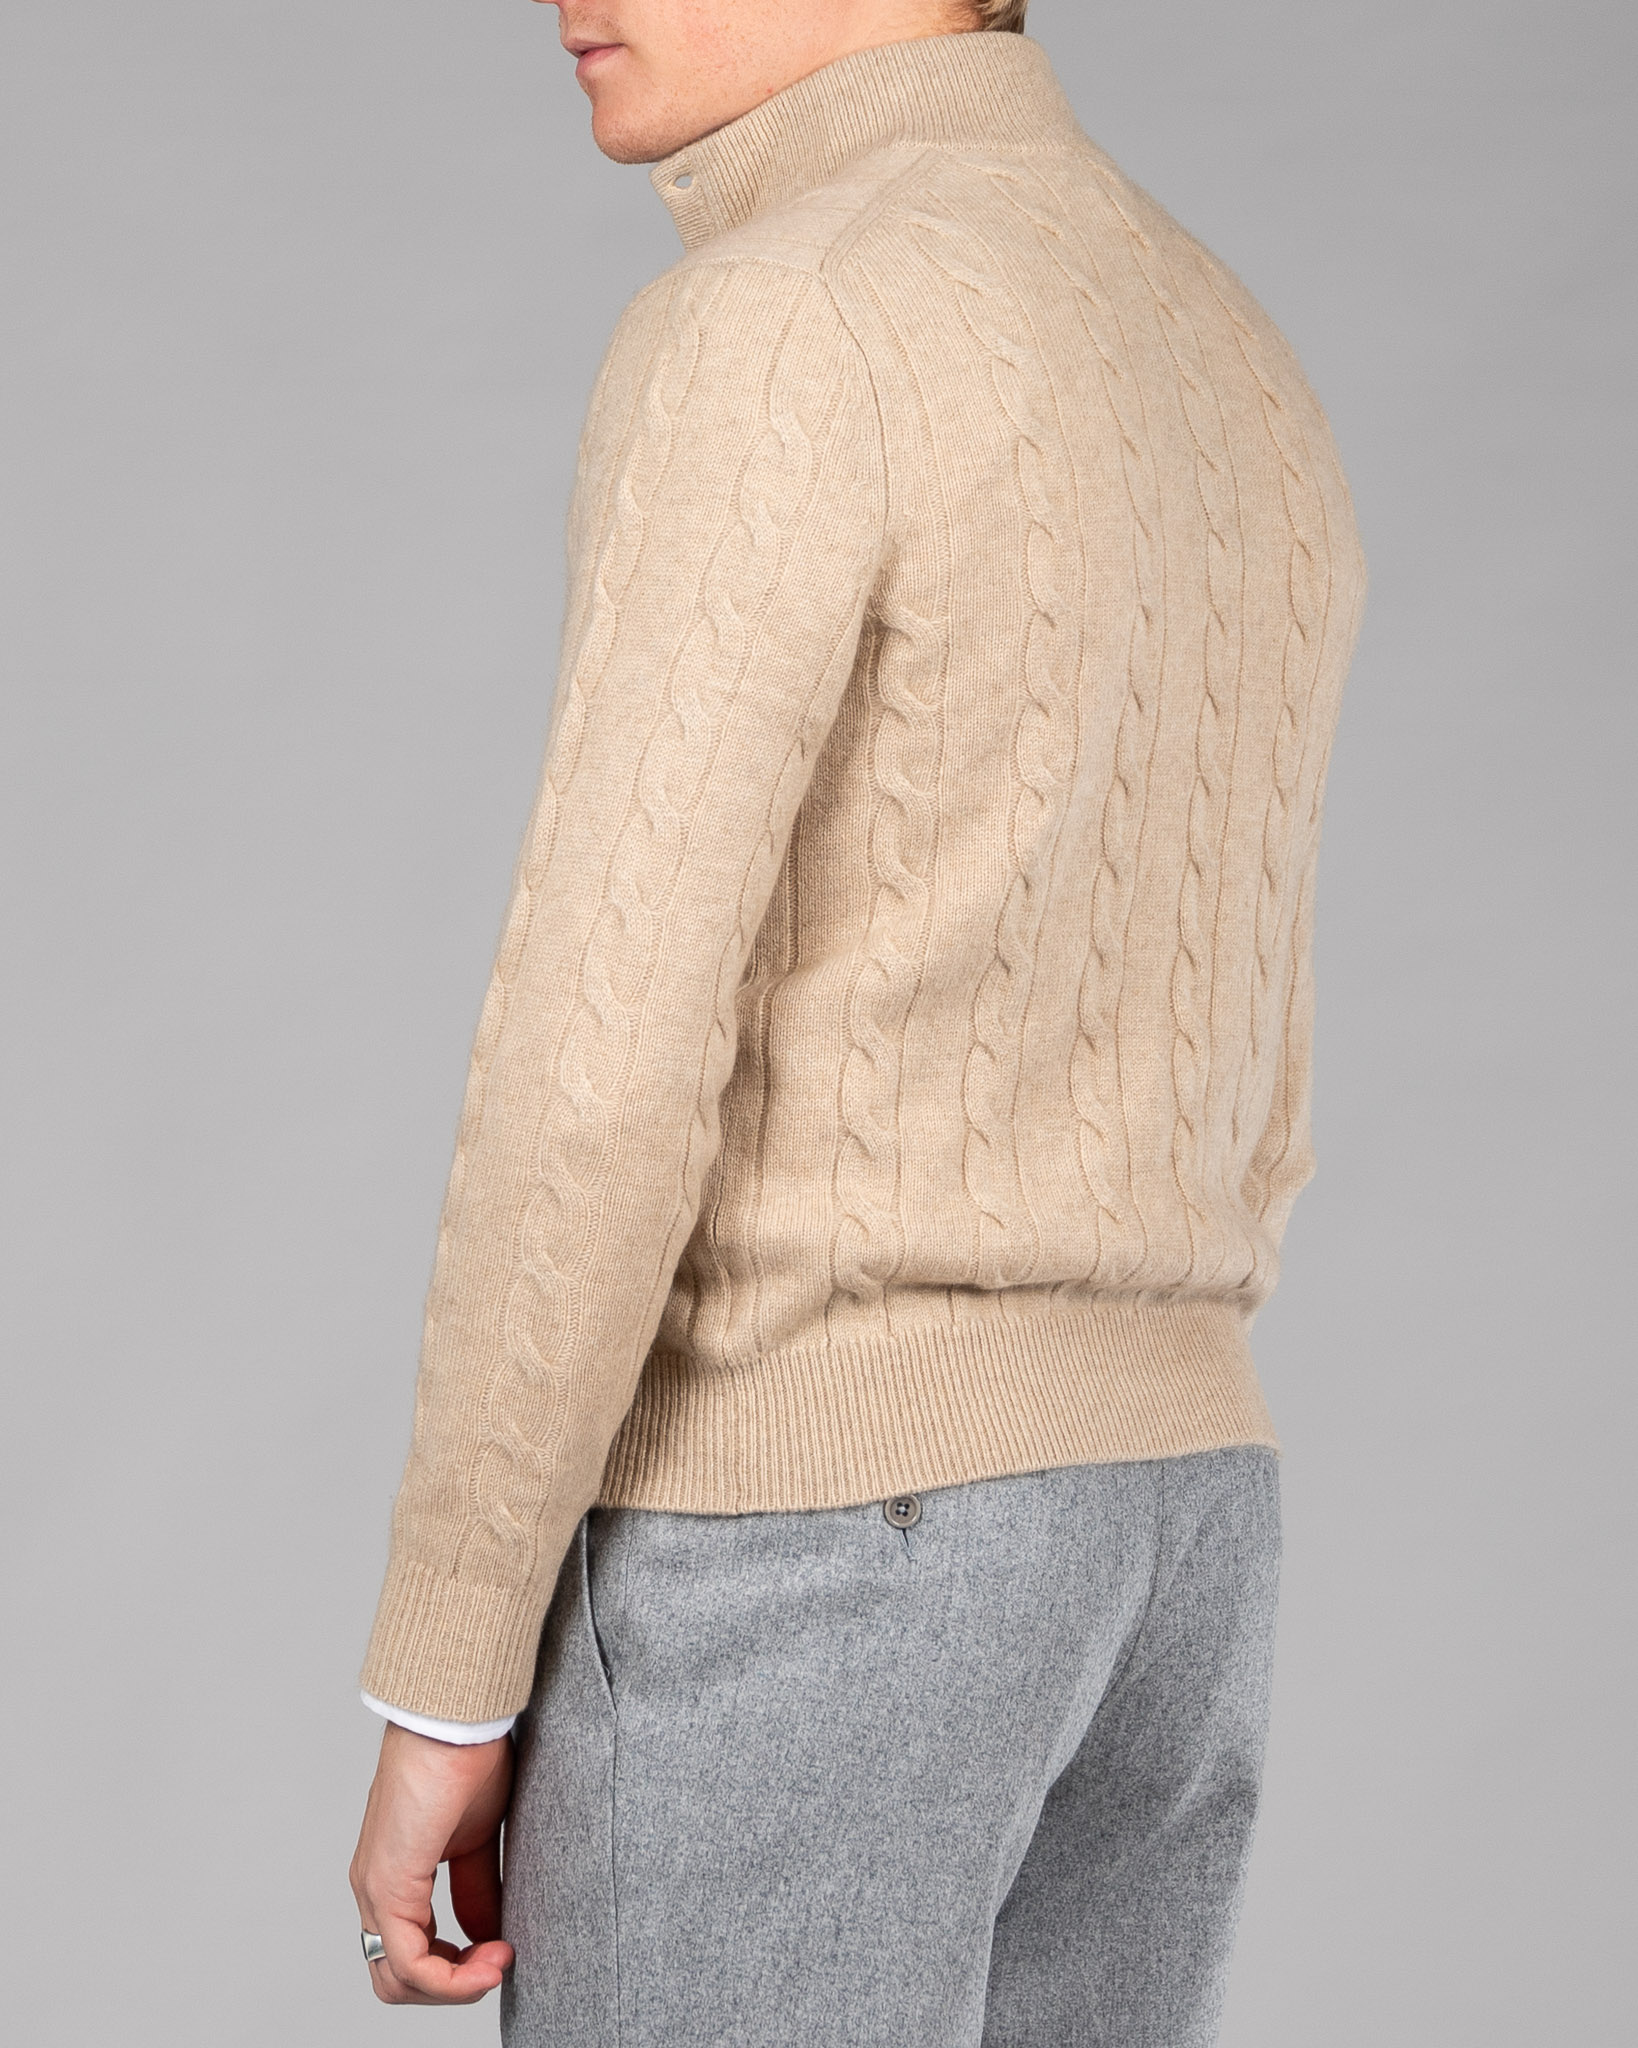 Cashmere Cable Knit With Bottons